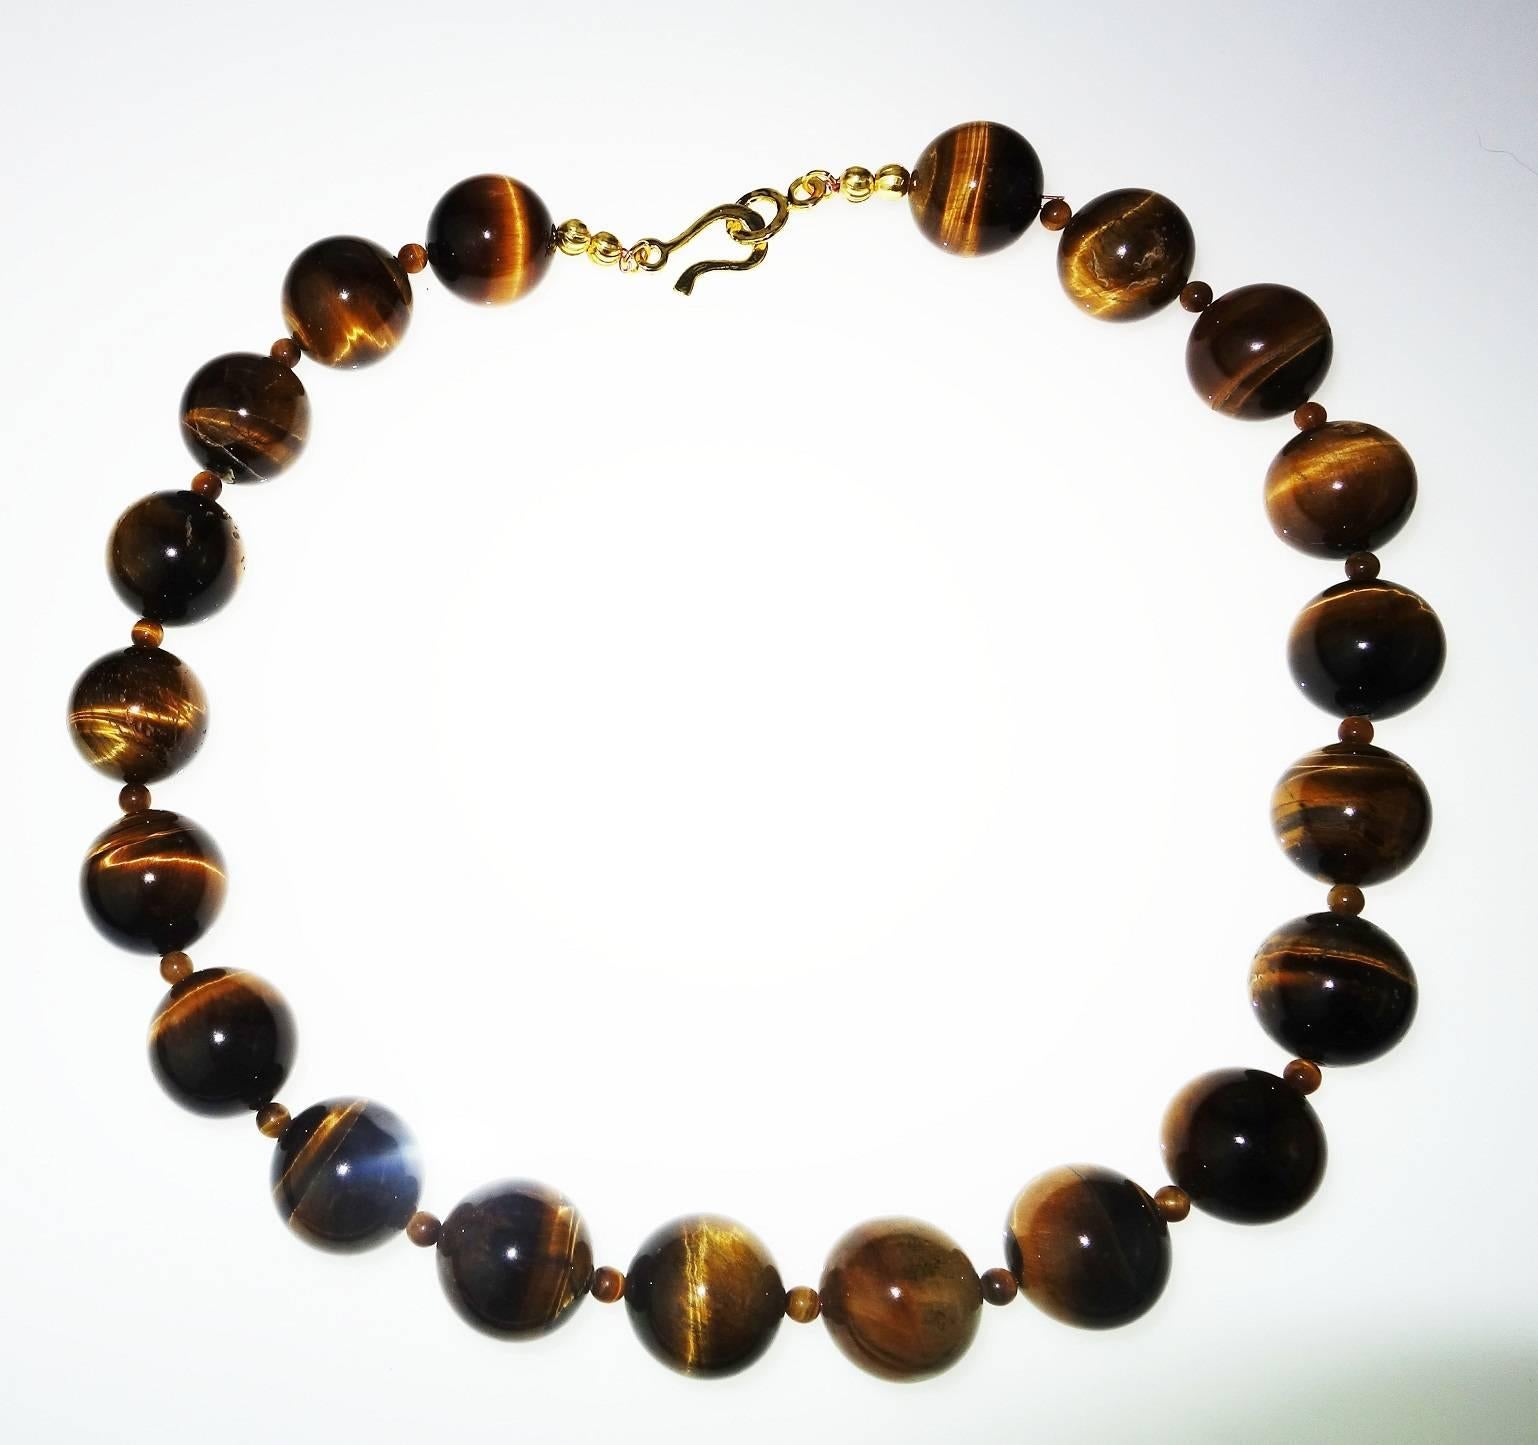 20MM Highly Polished Tiger’s Eye Necklace with 18Kt yellow gold hook and eye clasp.  These magnificent Tiger’s Eye beads are enhanced with more Tiger’s Eye 4mm accents. The necklace measures 21.5 inches.  